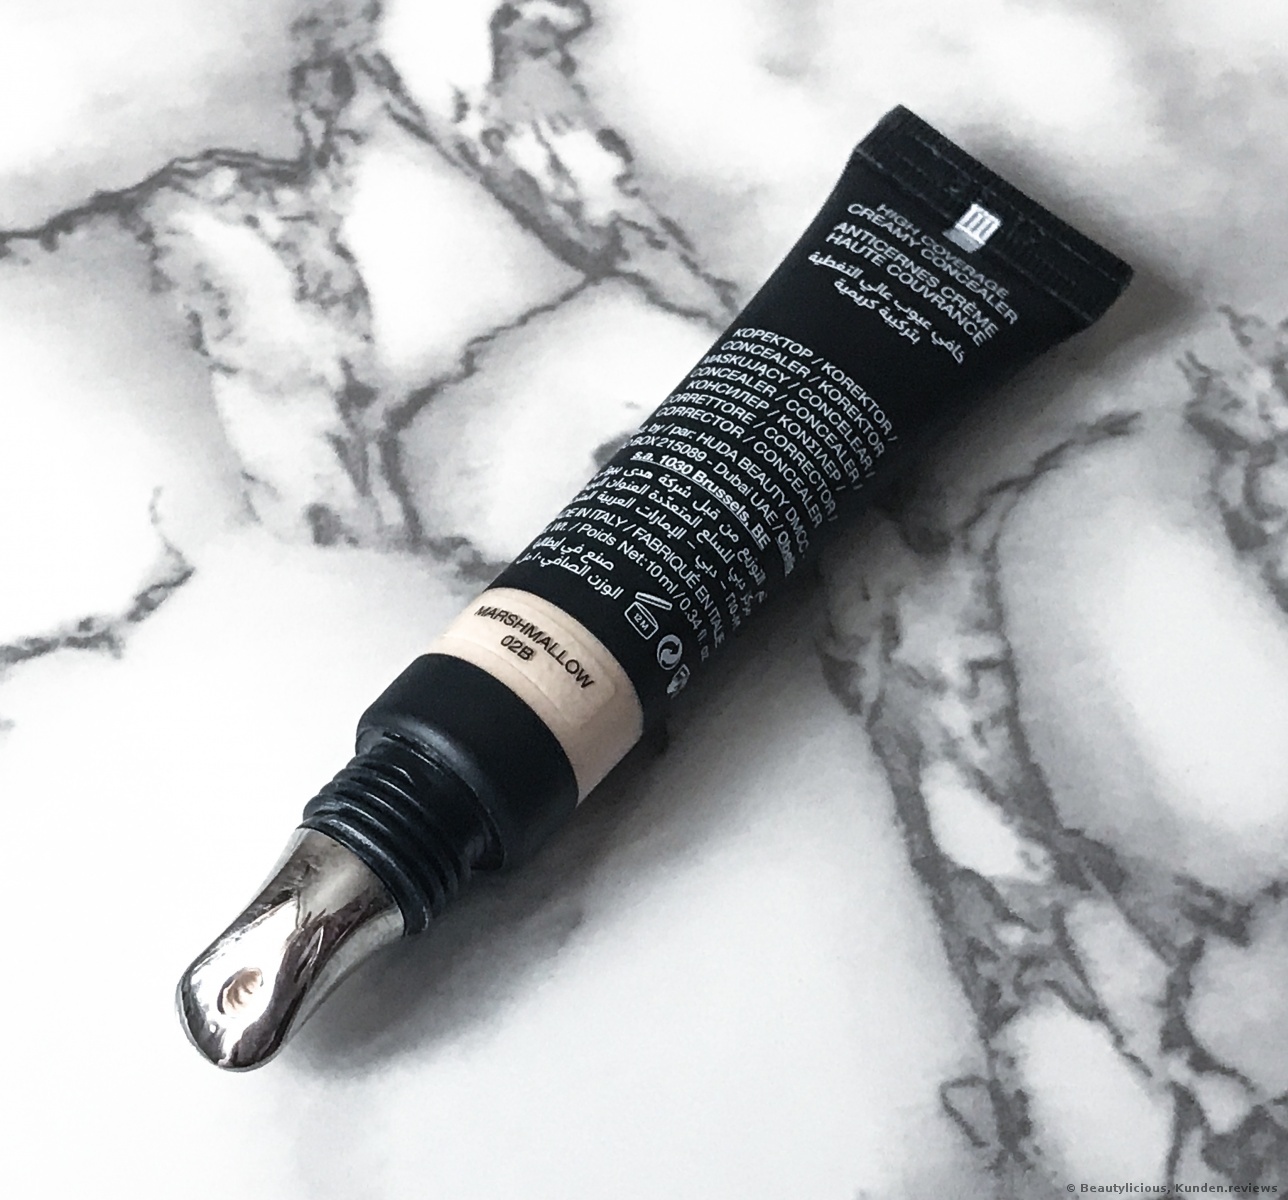 Huda Beauty The Overachiever Concealer Foto